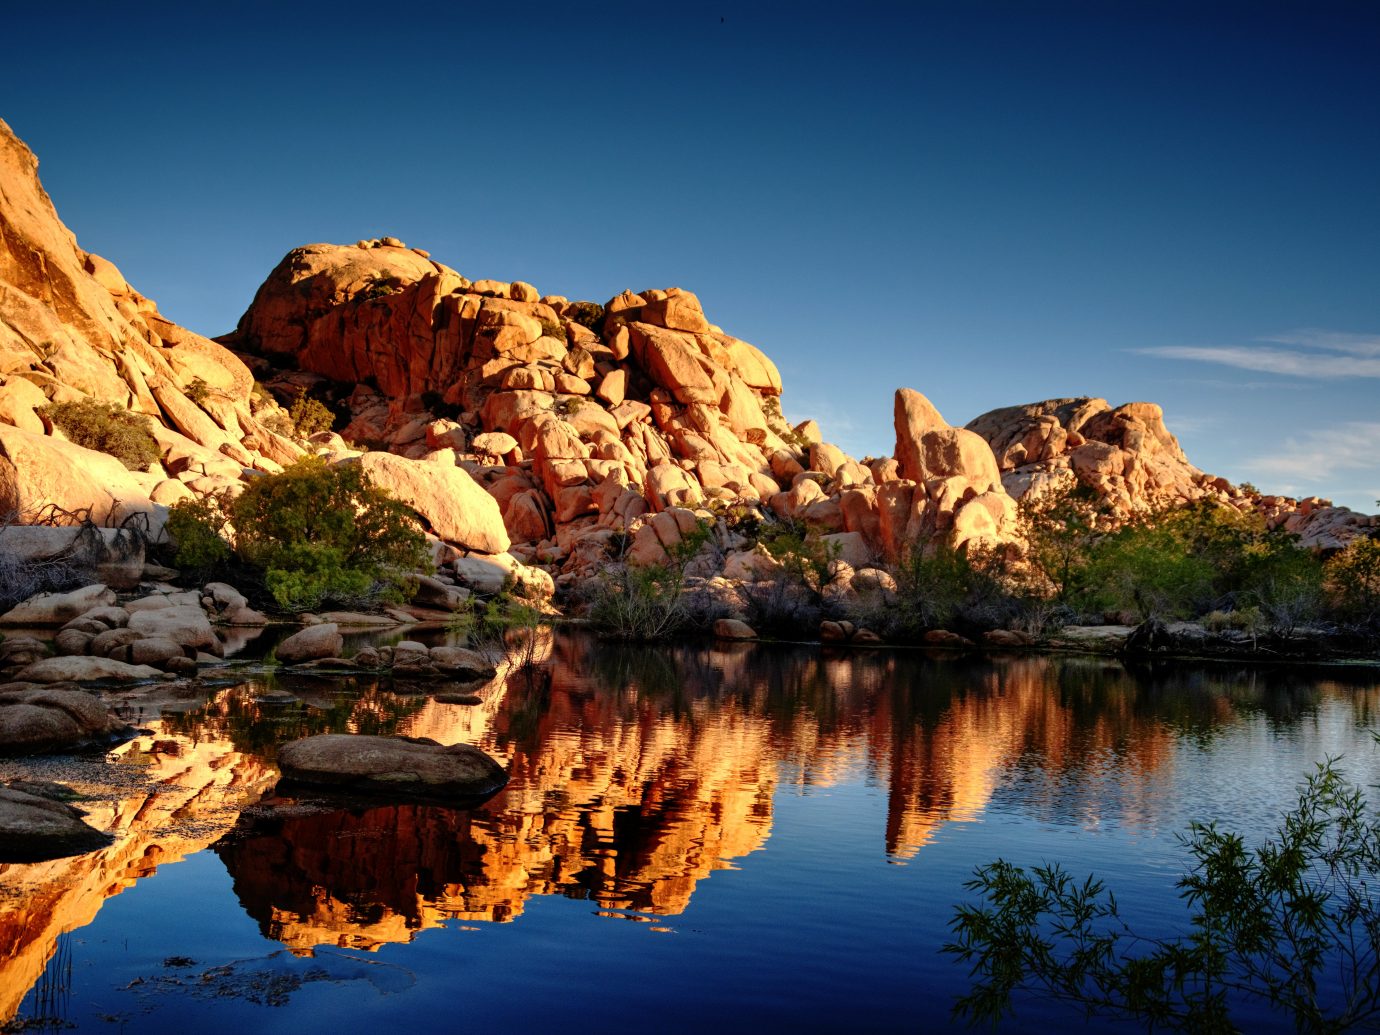 Early morning reflection at Barker Dam in Joshua Tree National Park